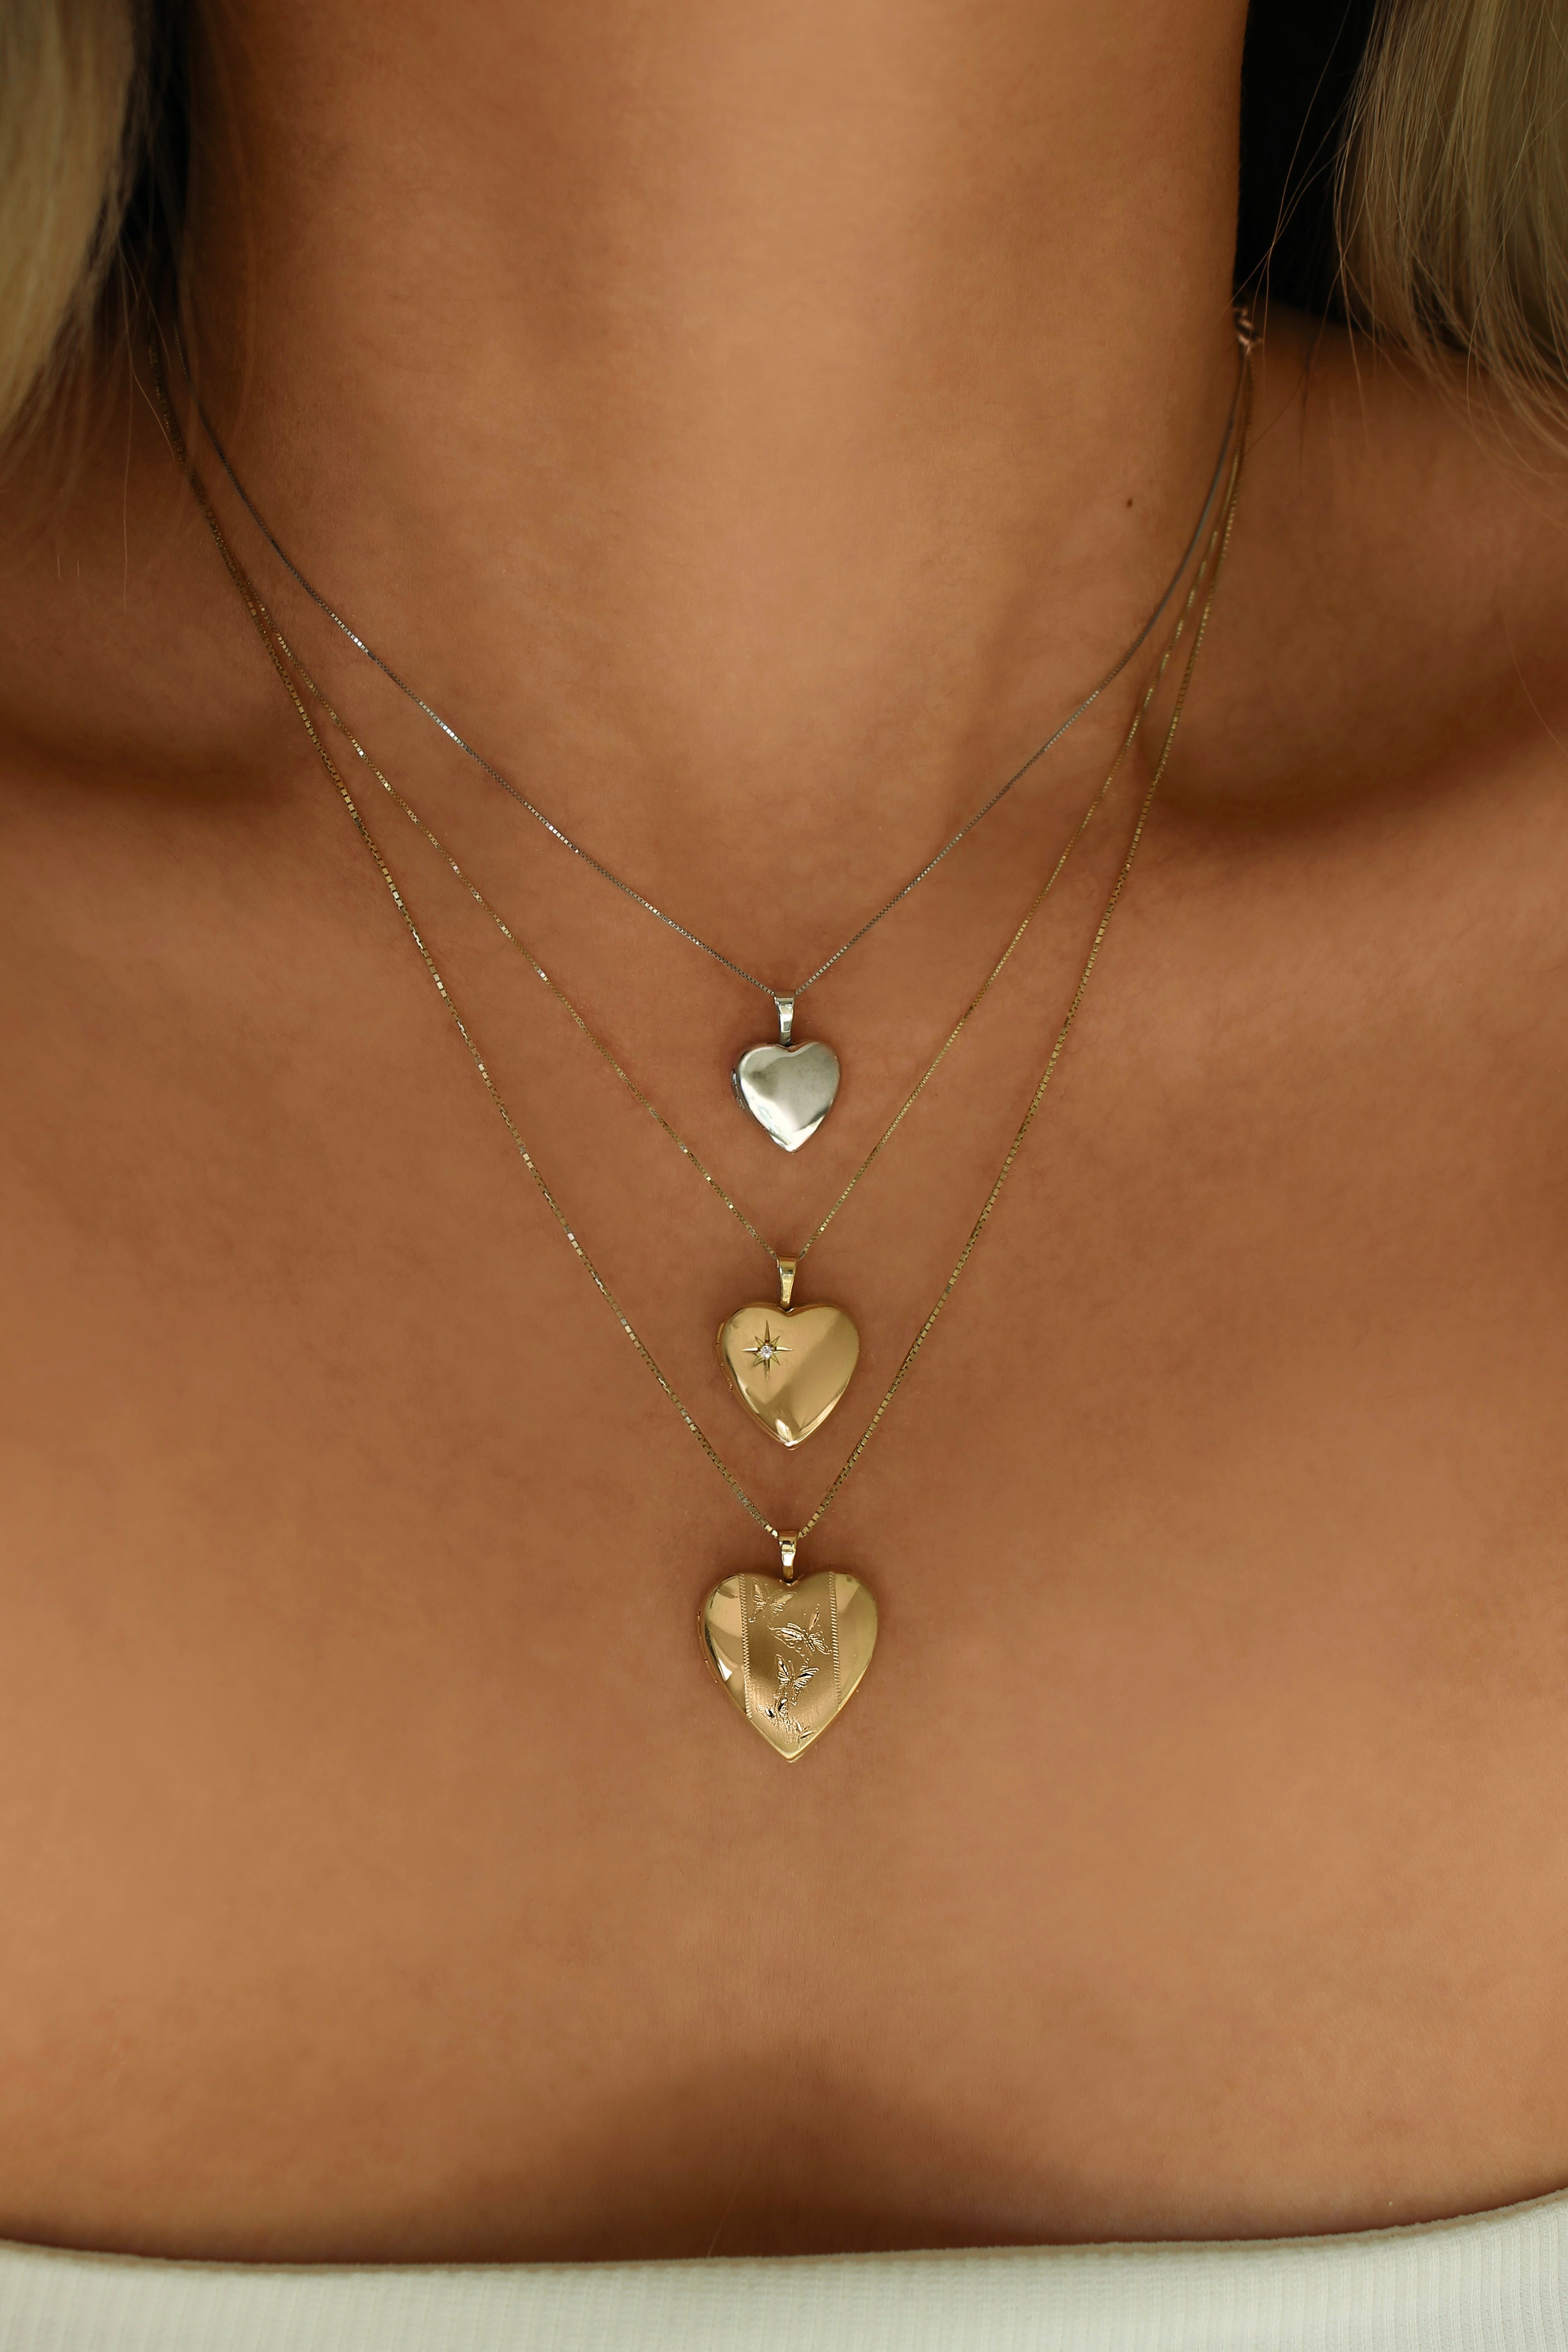 POWER WING Heart Locket Necklace for Women Girls That Holds India | Ubuy